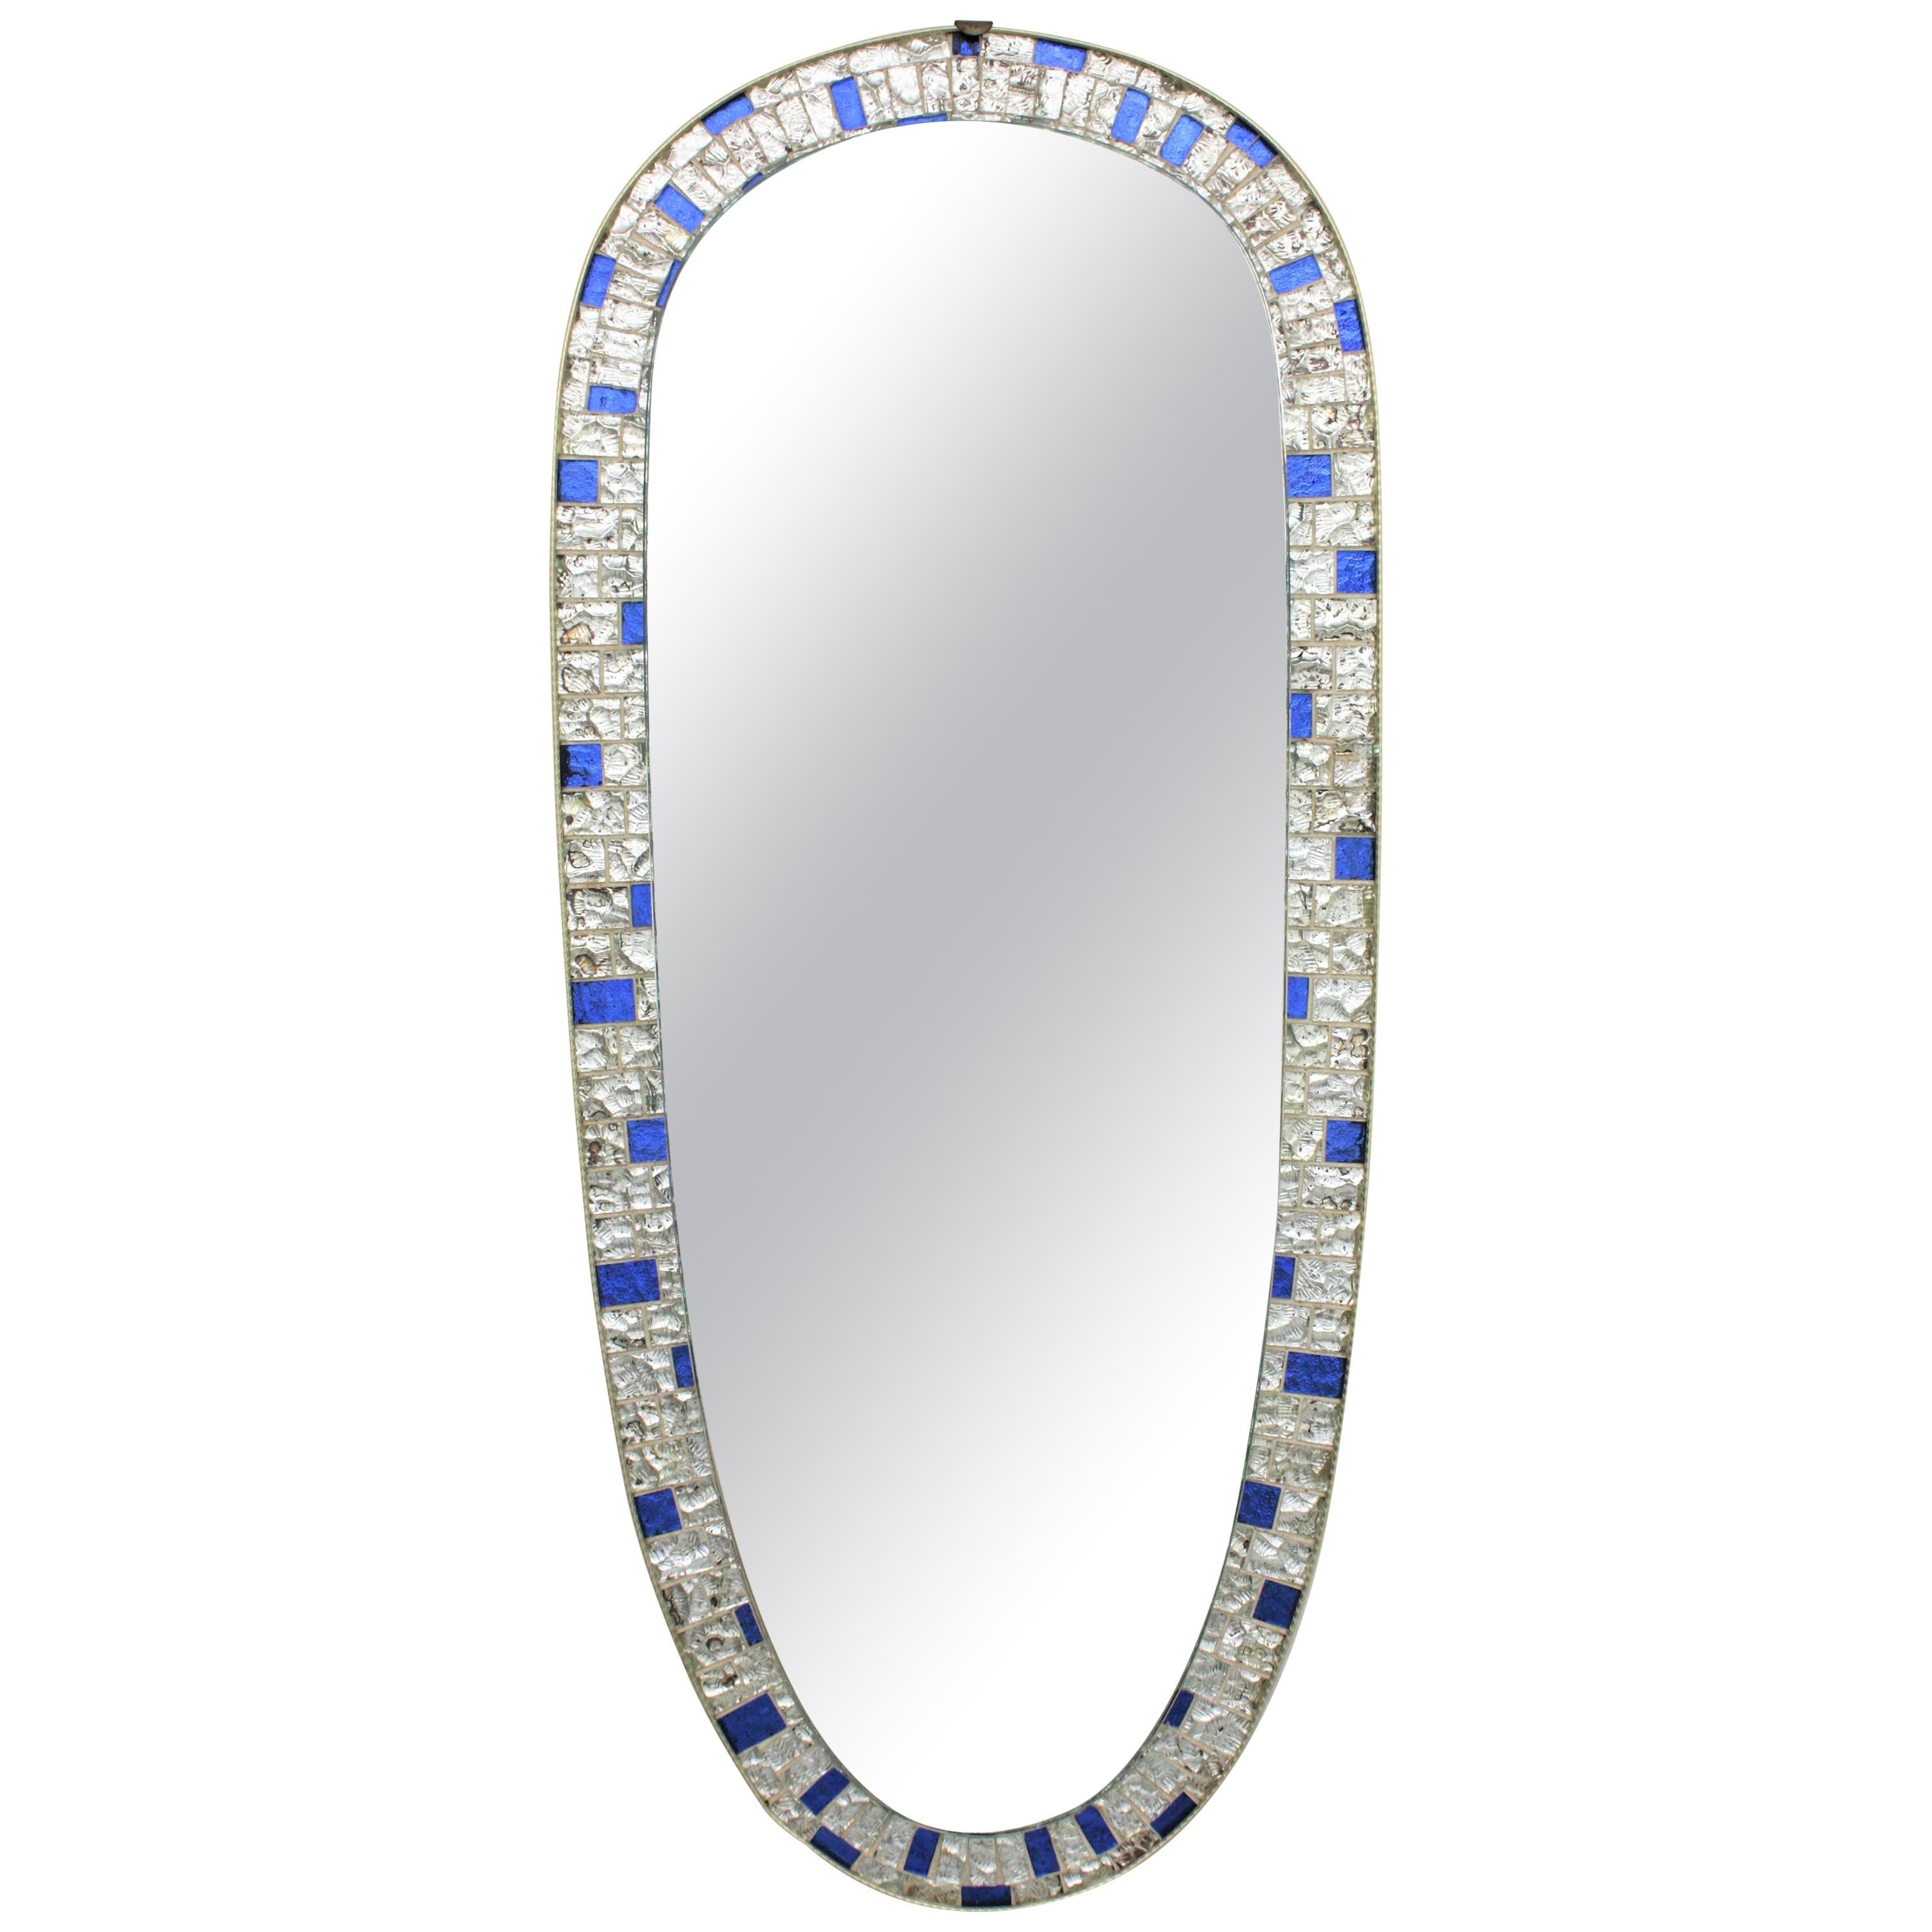 A Mid-Century Modernist oval wall mirror with mosaic frame in blue and silver colors, Spain, 1960s
This eye-catching mirror is framed by handcut clear and blue iridescent textured glasses. The silver leaf under the glasses provides an iridescent